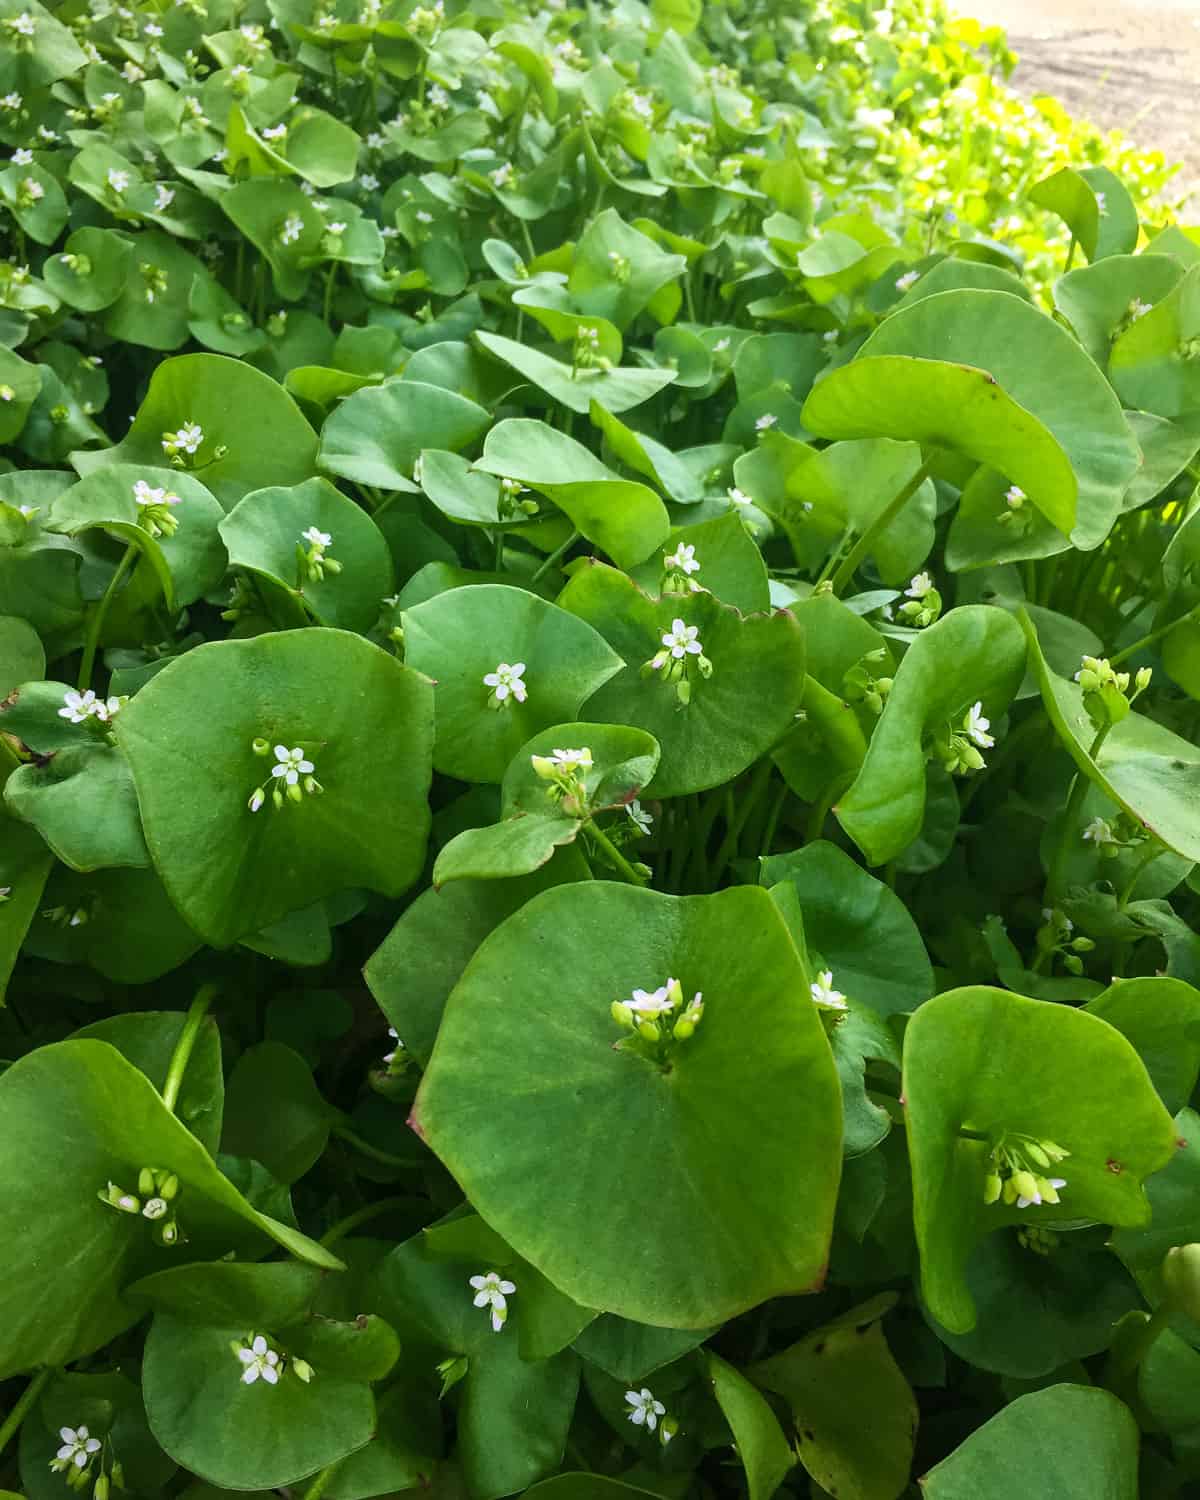 Miner's lettuce with small blooms beginning.